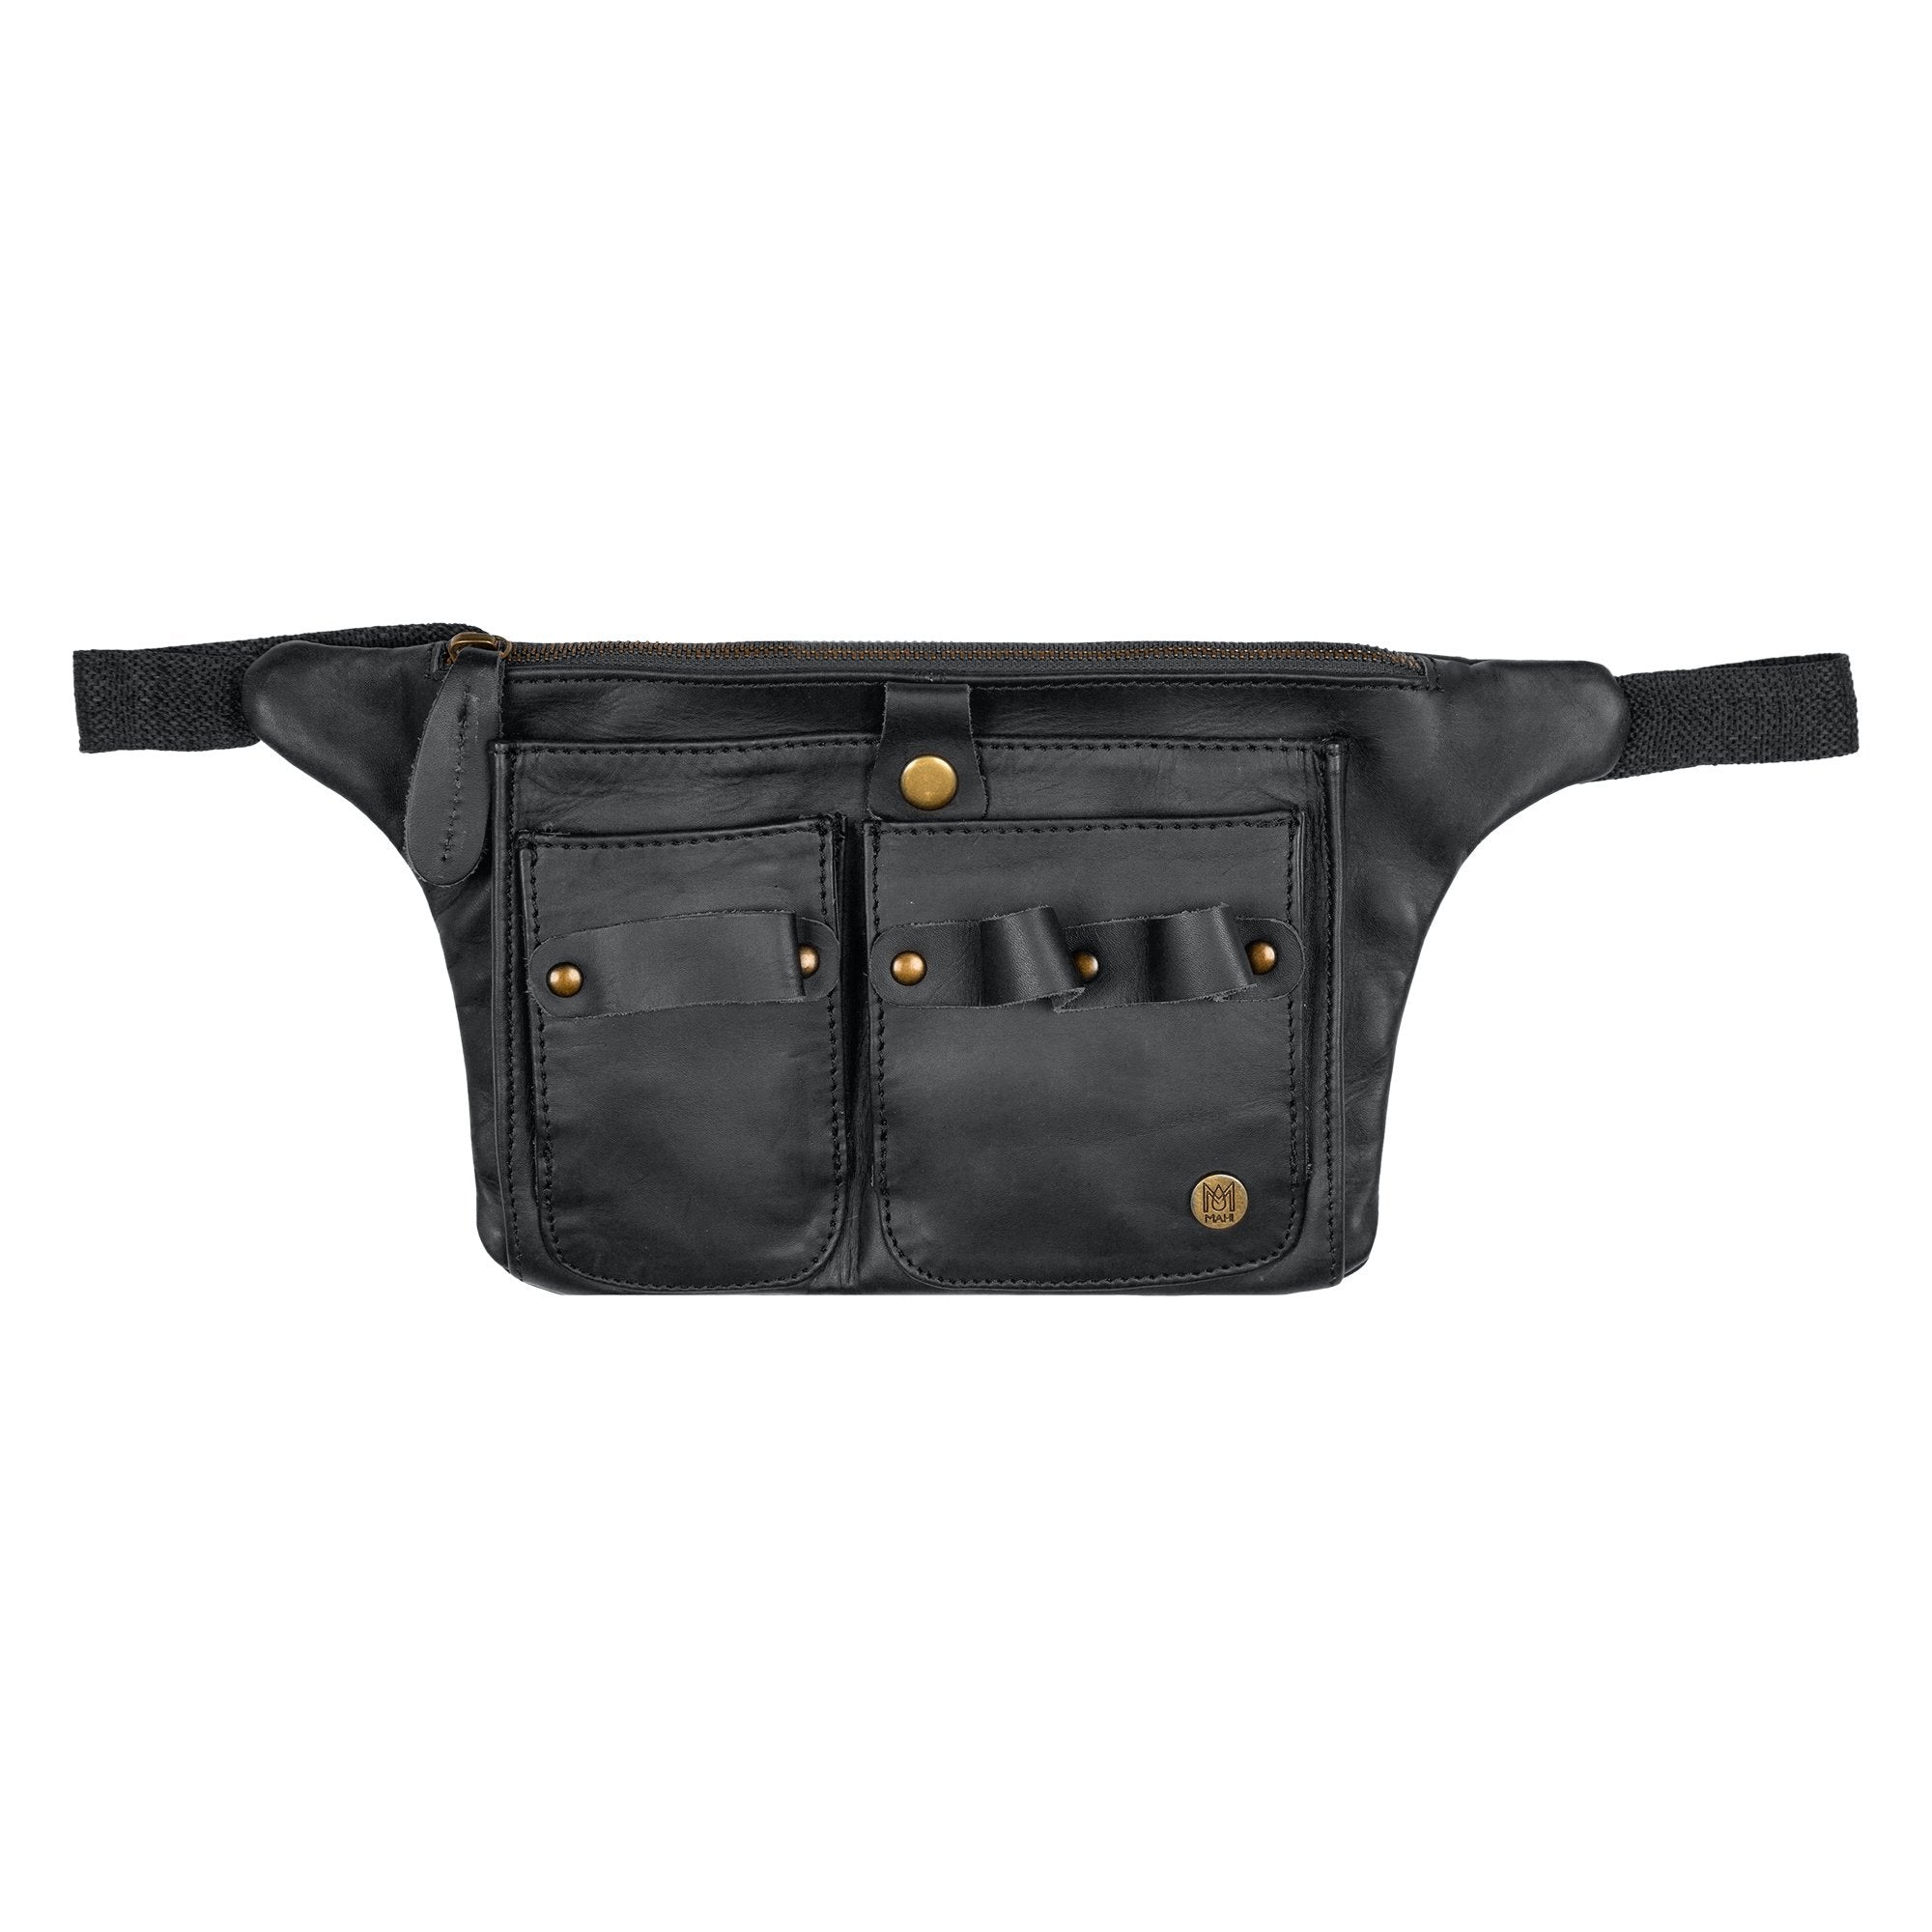 Black Leather Tool belt for Hairdressers and Make-up artists – MAHI Leather